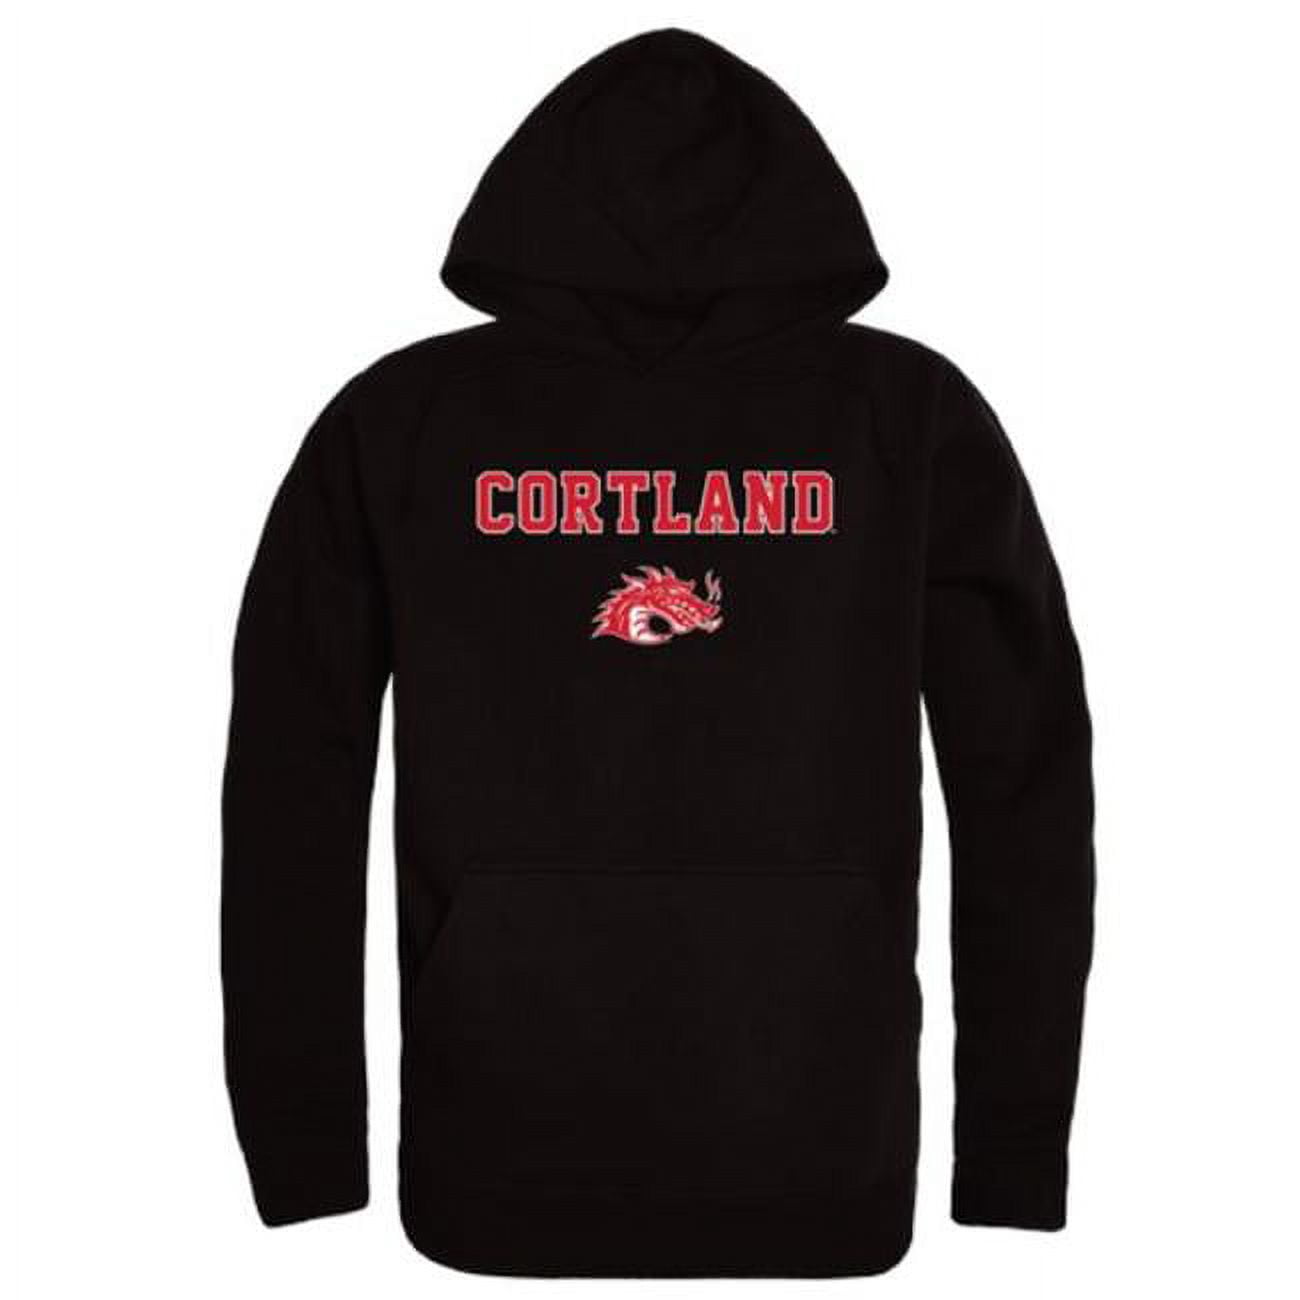 W Republic 540-712-BLK-01 State University of New York at Geneseo Cortland Red Dragons Campus Hoodie, Black - Small